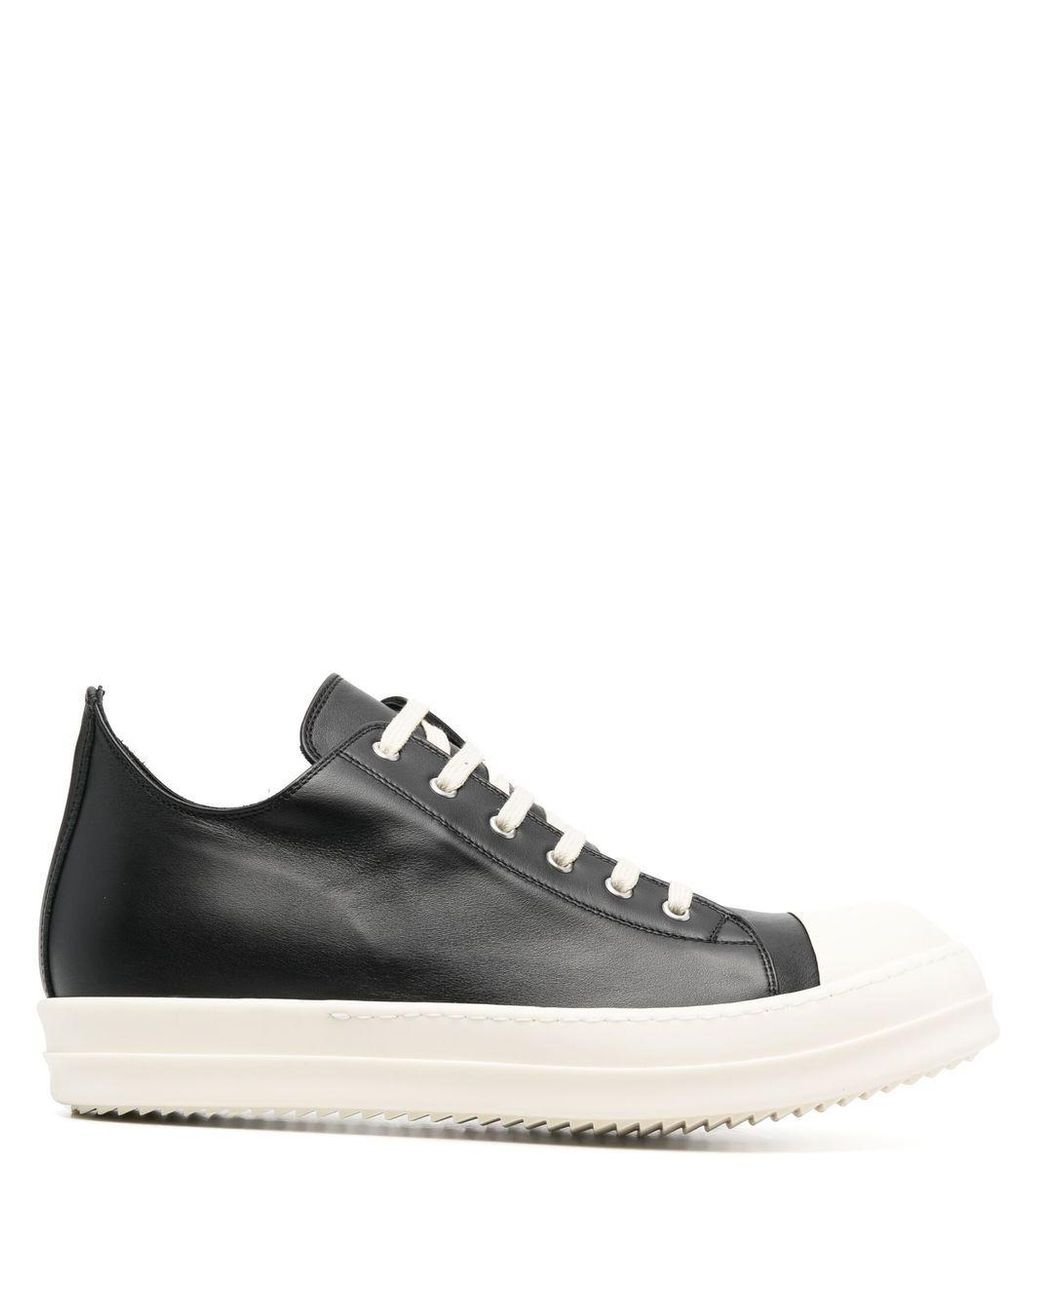 Rick Owens Leather Strobe Low-top Sneakers in Black for Men | Lyst Canada